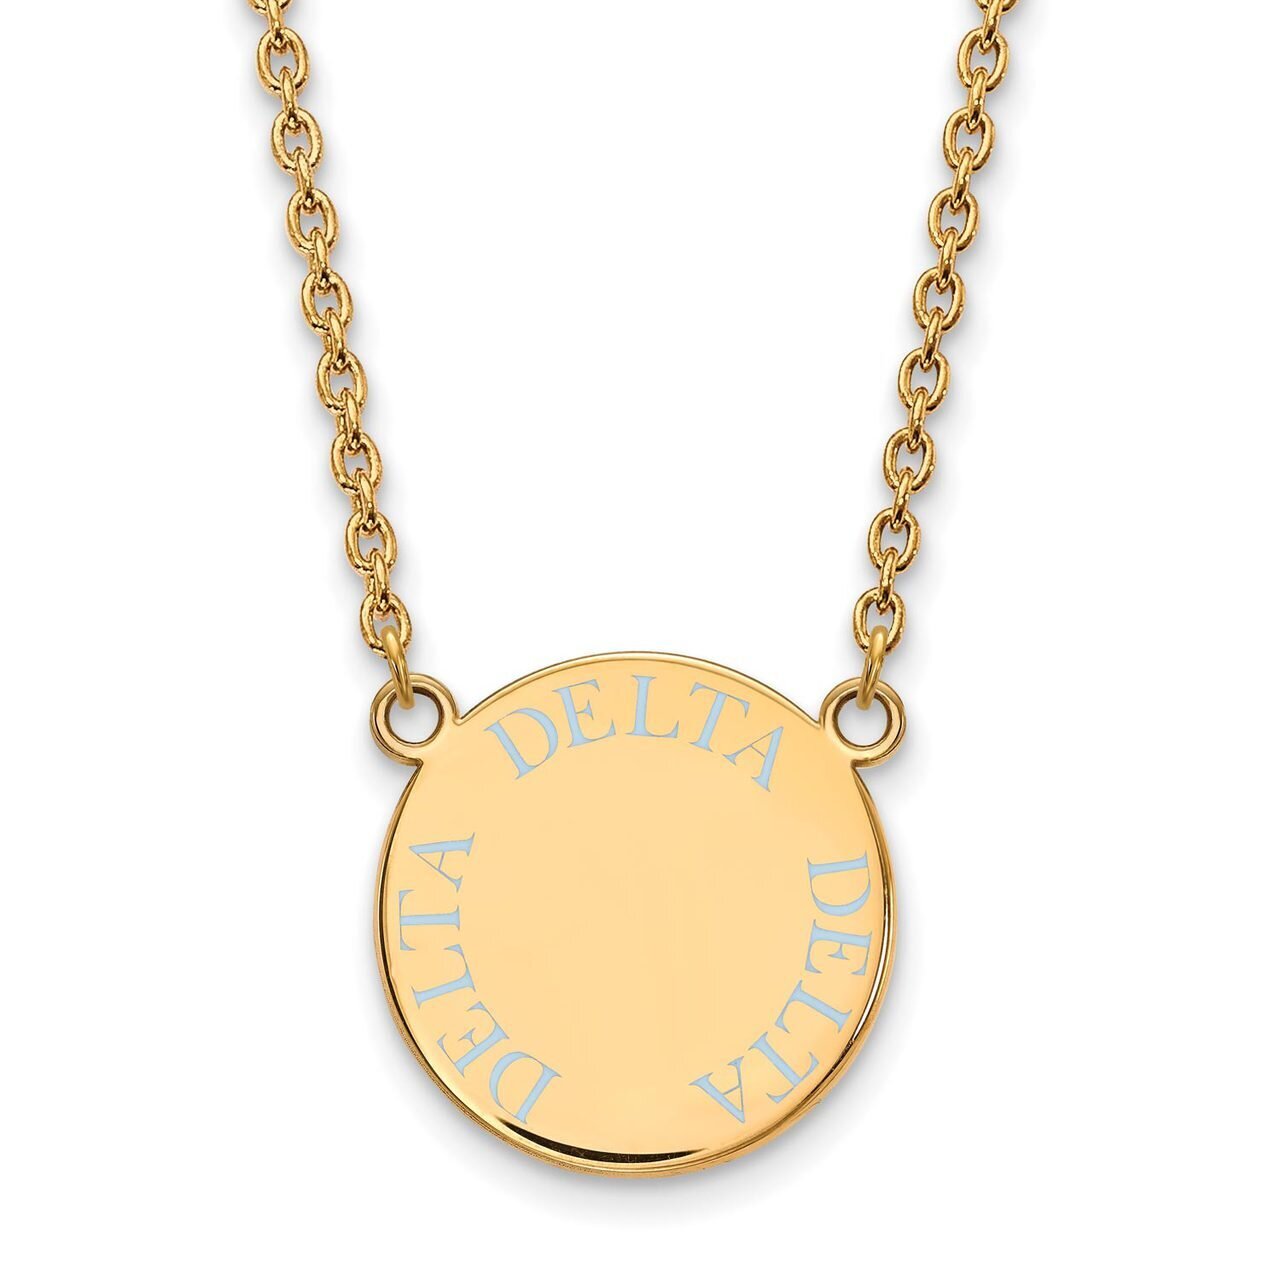 Delta Delta Delta Small Enameled Pendant with 18 Inch Chain Gold-plated Silver GP015DDD-18